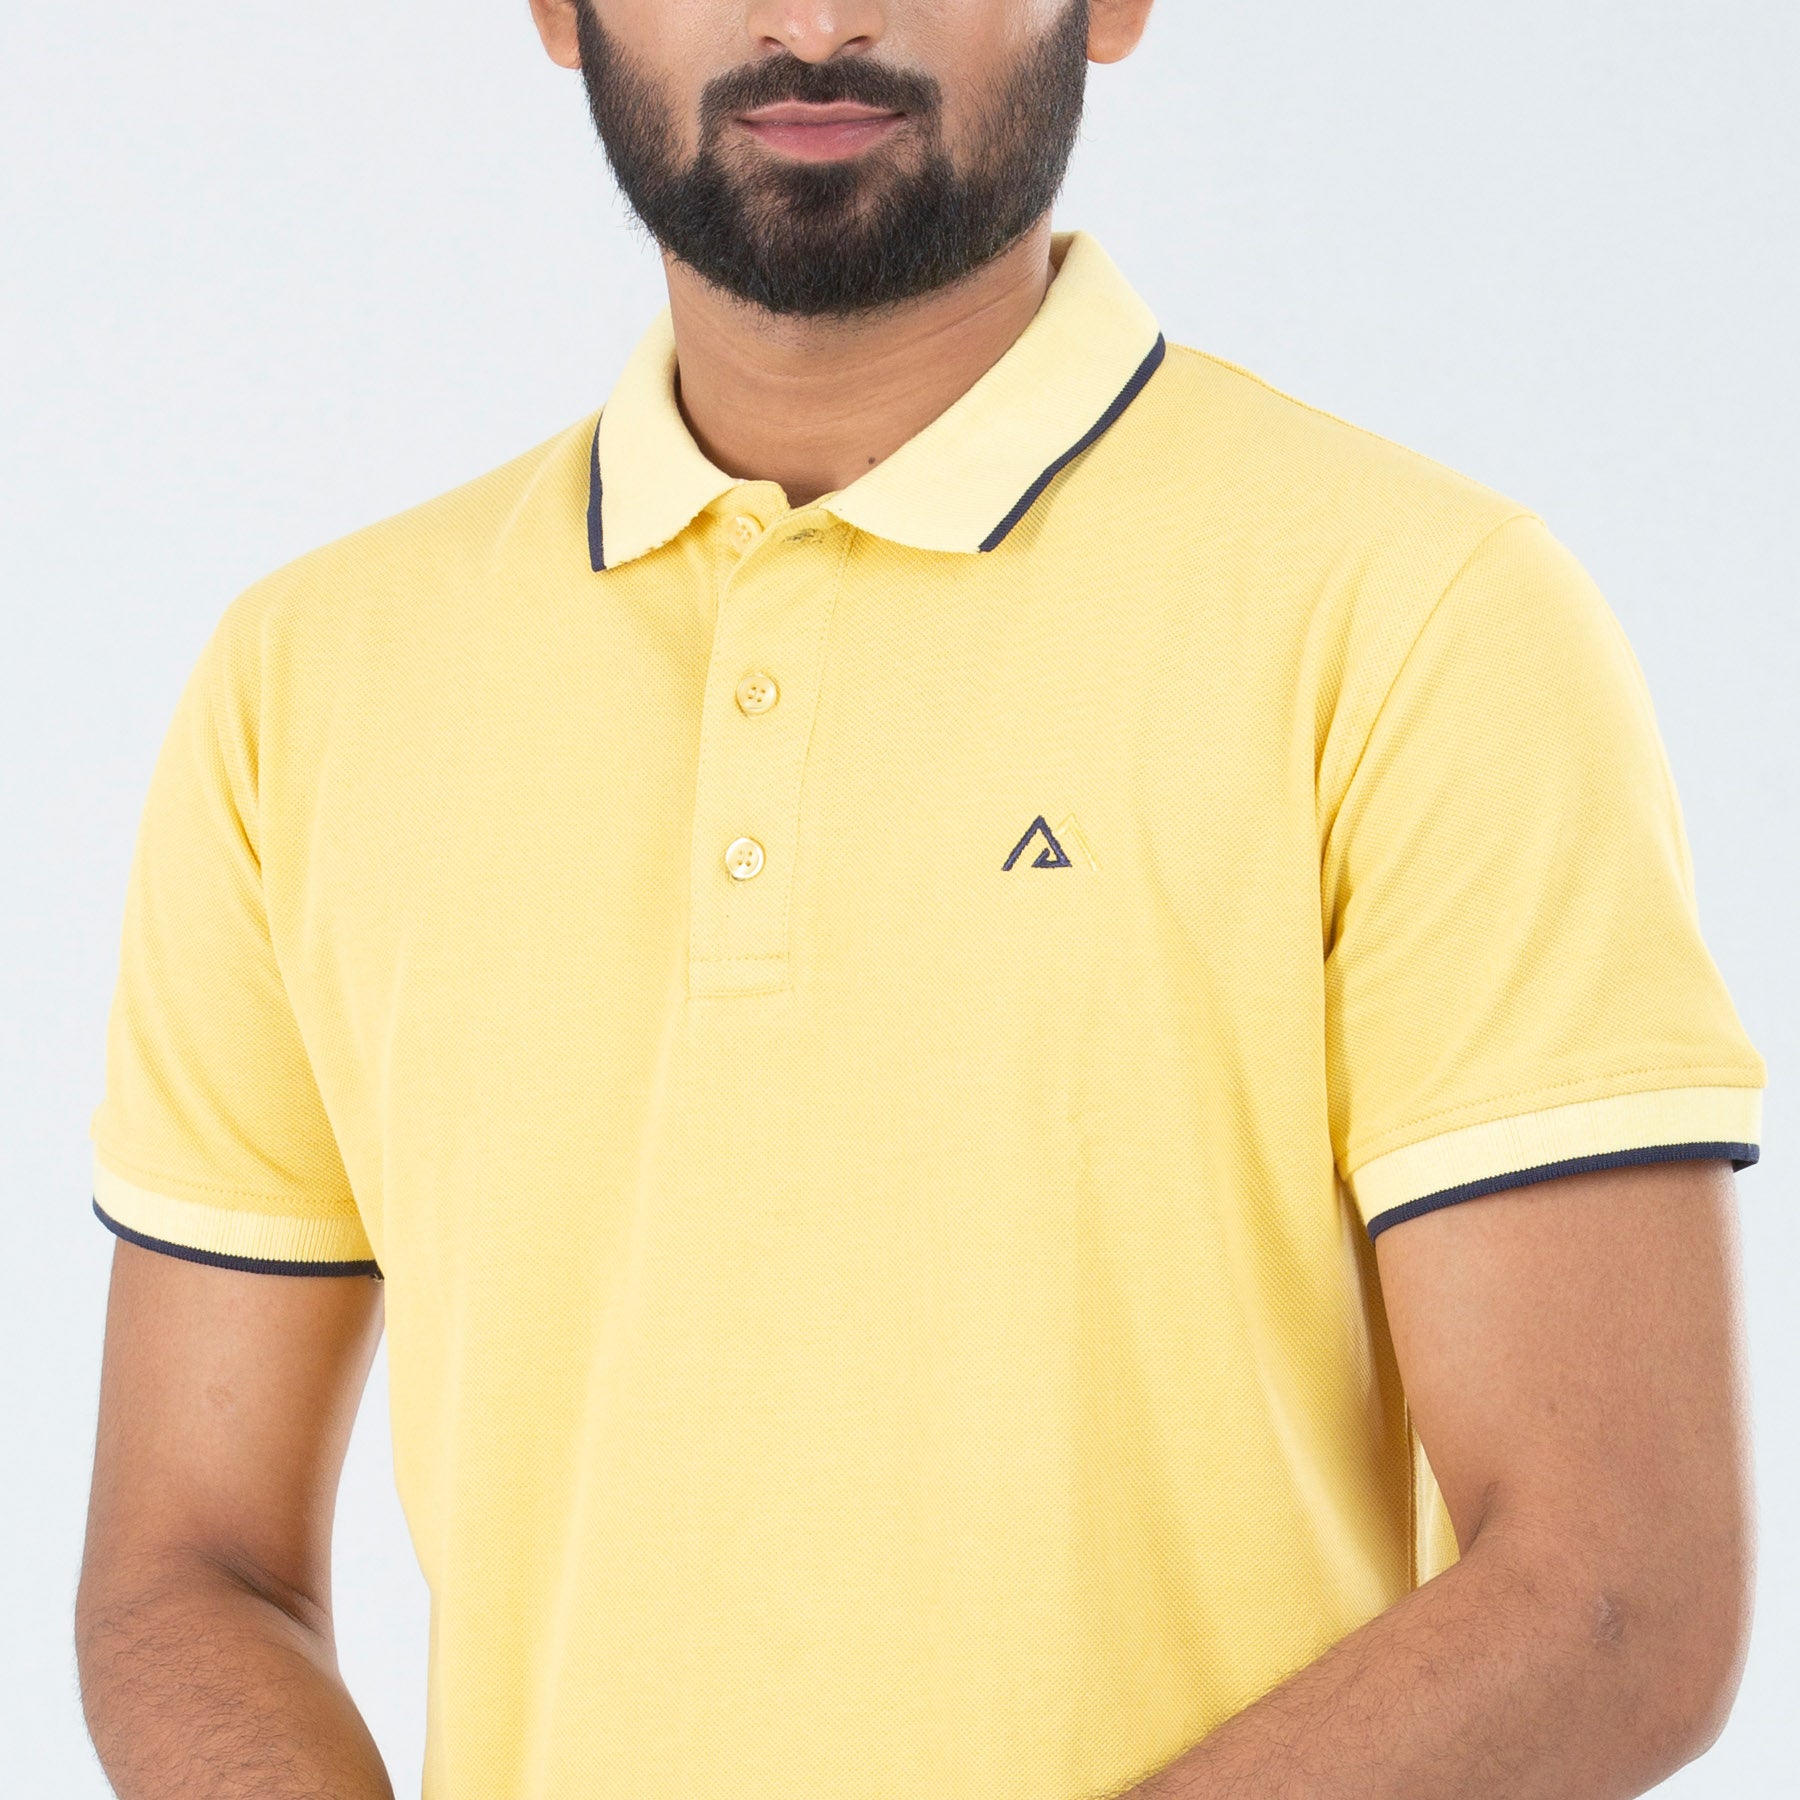  View details for Polo Shirt for Men | Solid Yellow Color Polo Shirt for Men | Solid Yellow Color